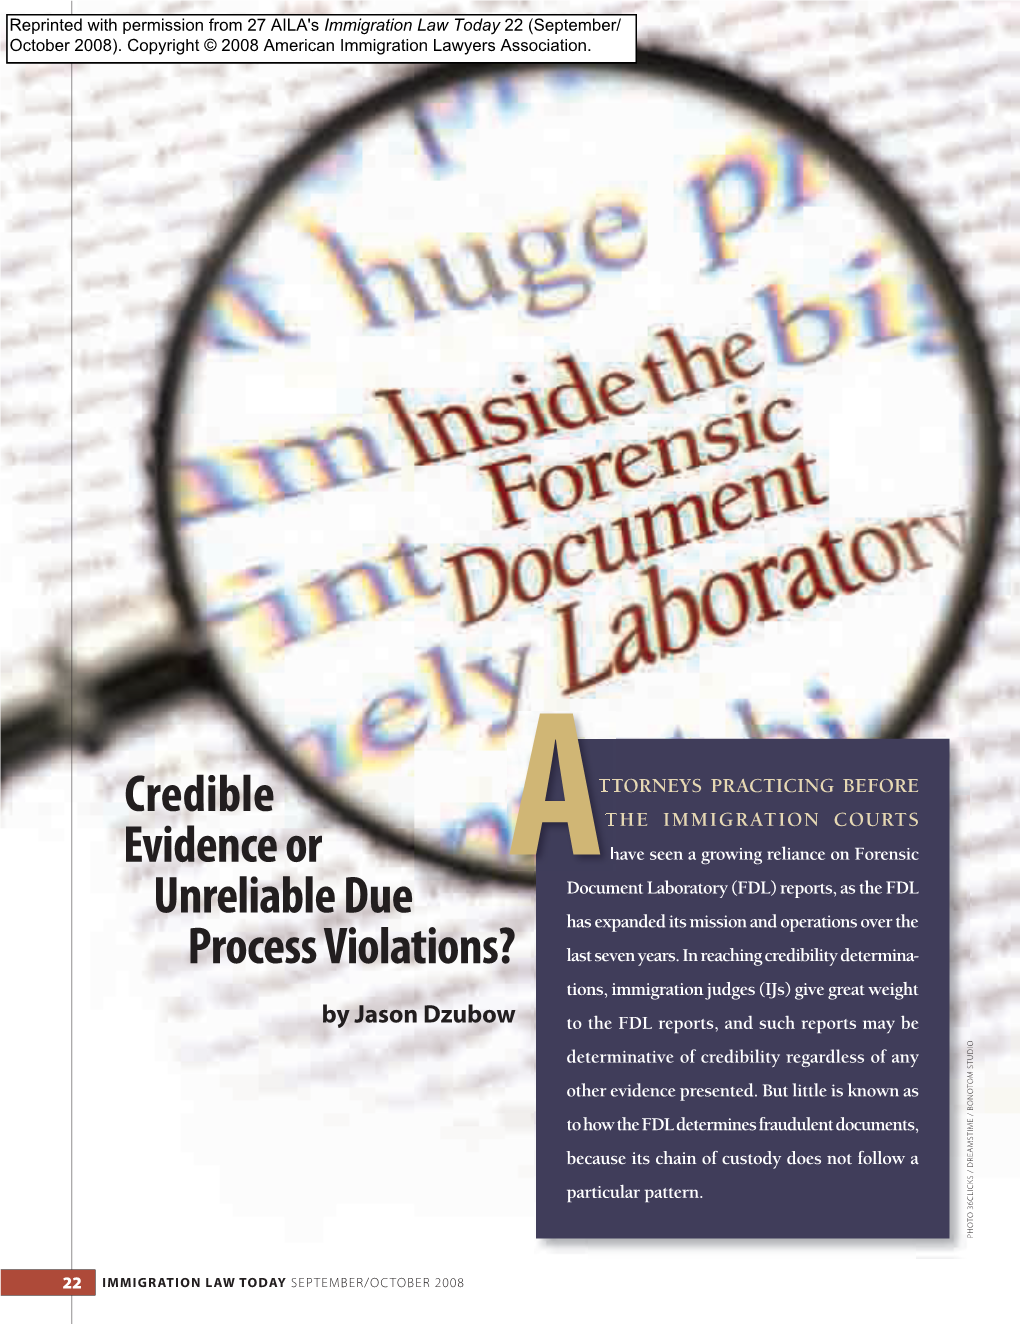 Credible Evidence Or Unreliable Due Process Violations?